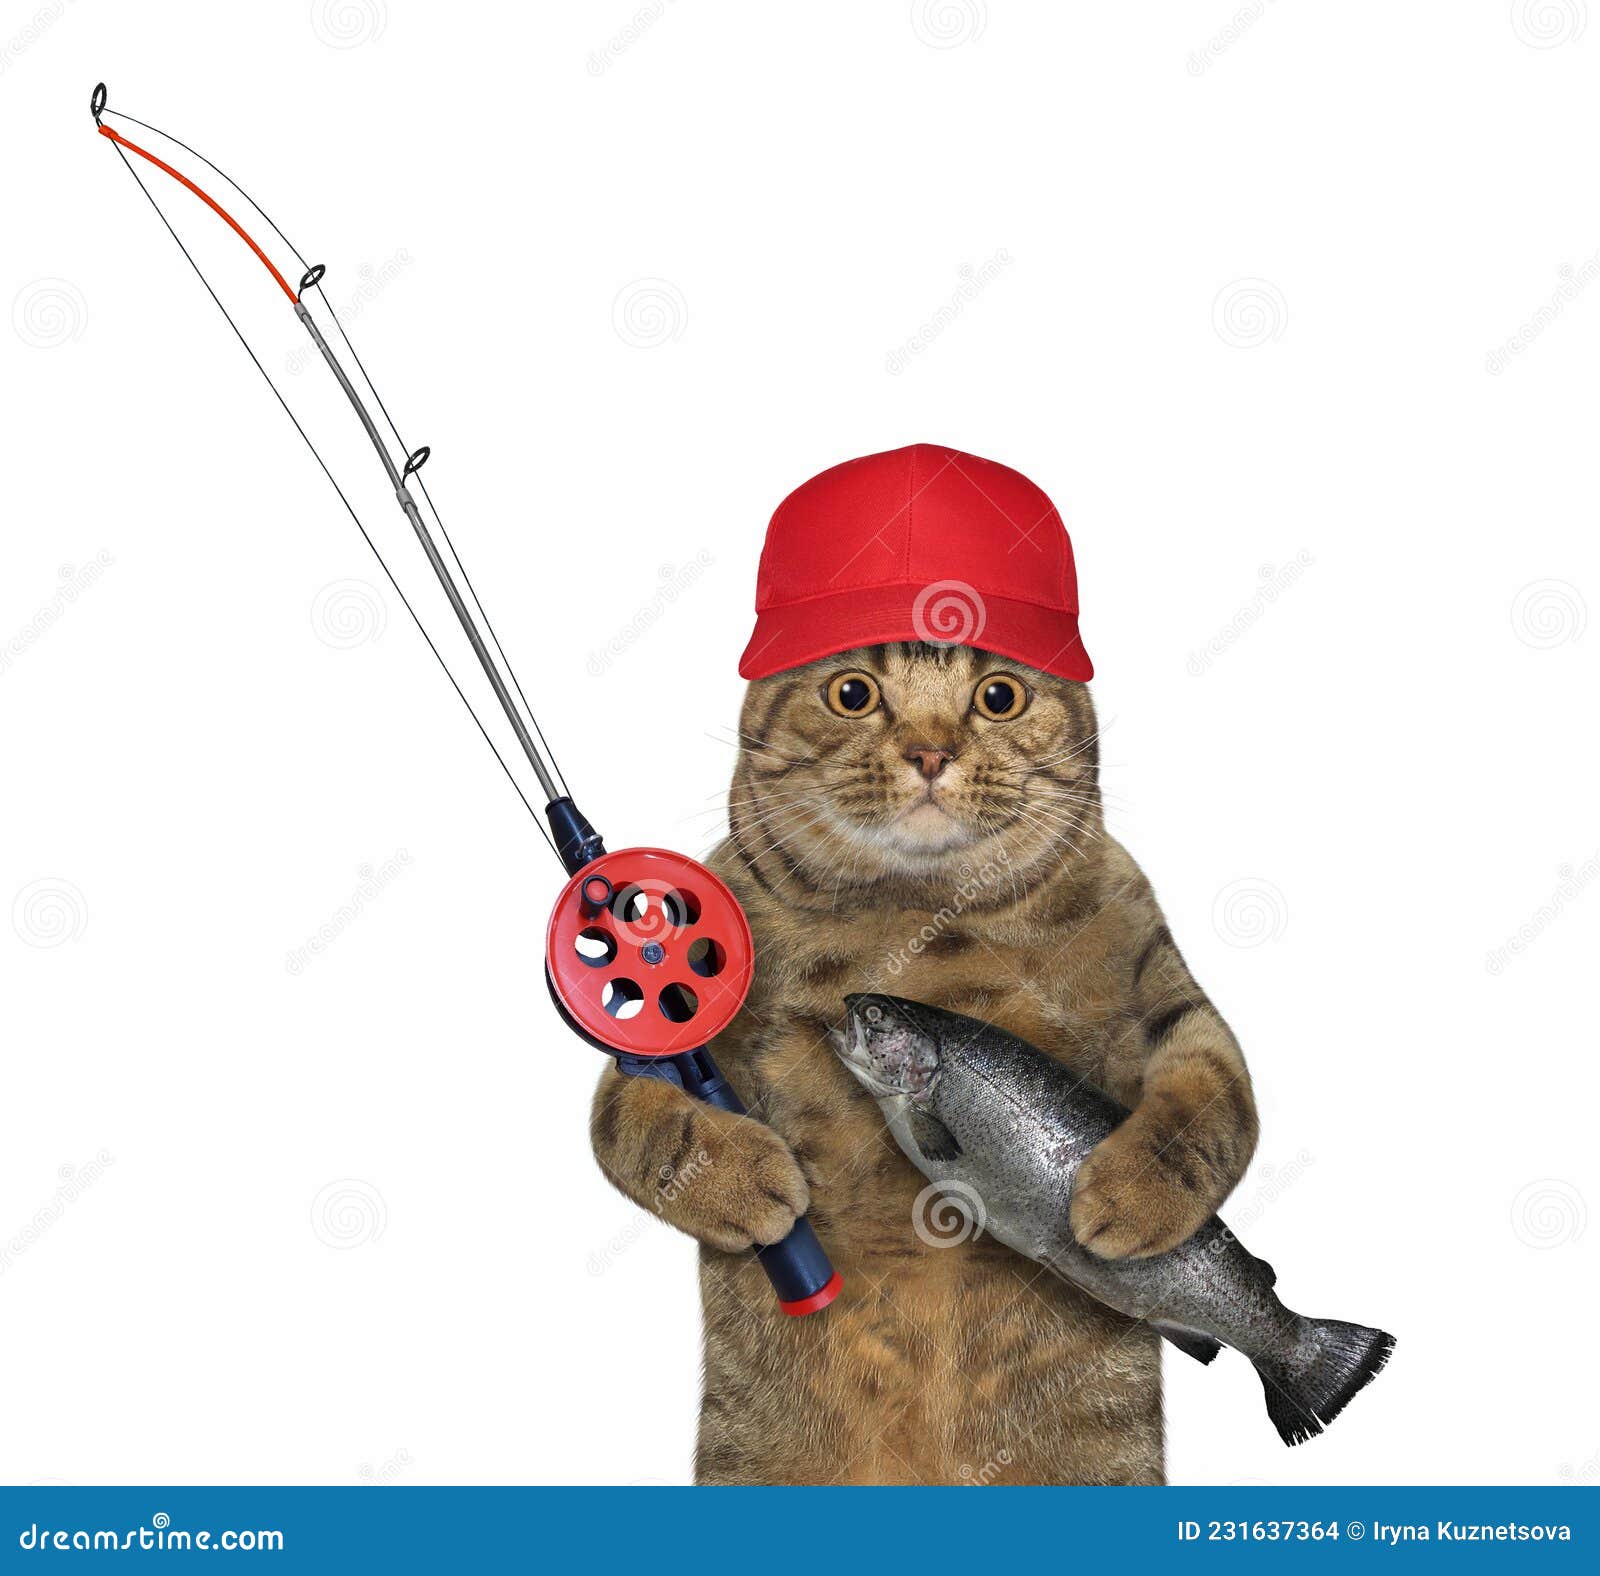 https://thumbs.dreamstime.com/z/beige-cat-fisher-red-cap-fishing-rod-caught-trout-white-background-isolated-cat-fishing-rod-holds-caught-231637364.jpg